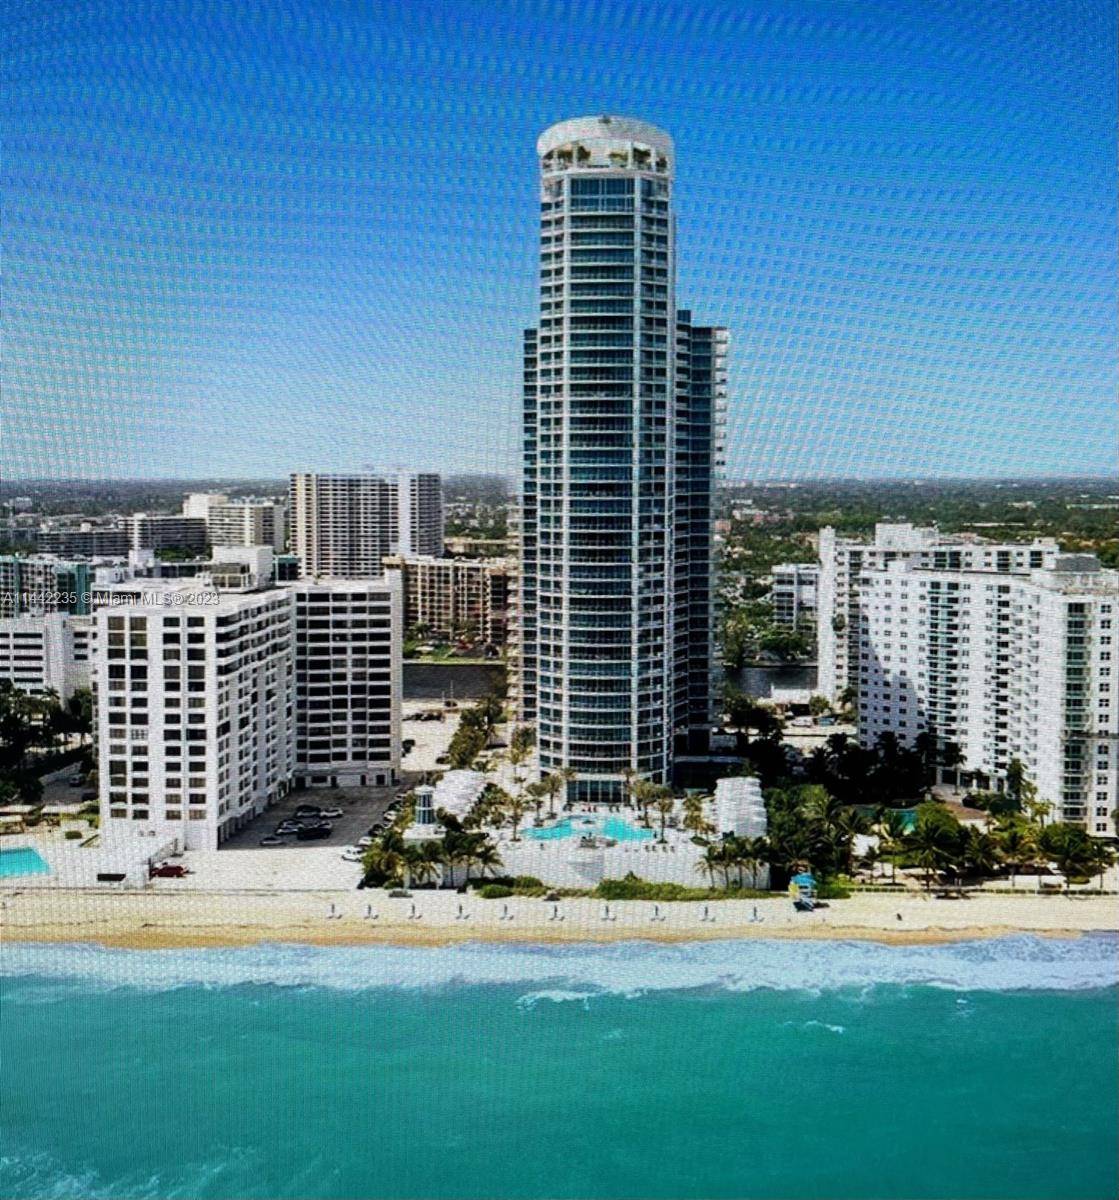 5 Star luxury oceanfront living with fabulous ocean, Intracoastal, and city views from this highly desirable Line 1 corner unit.